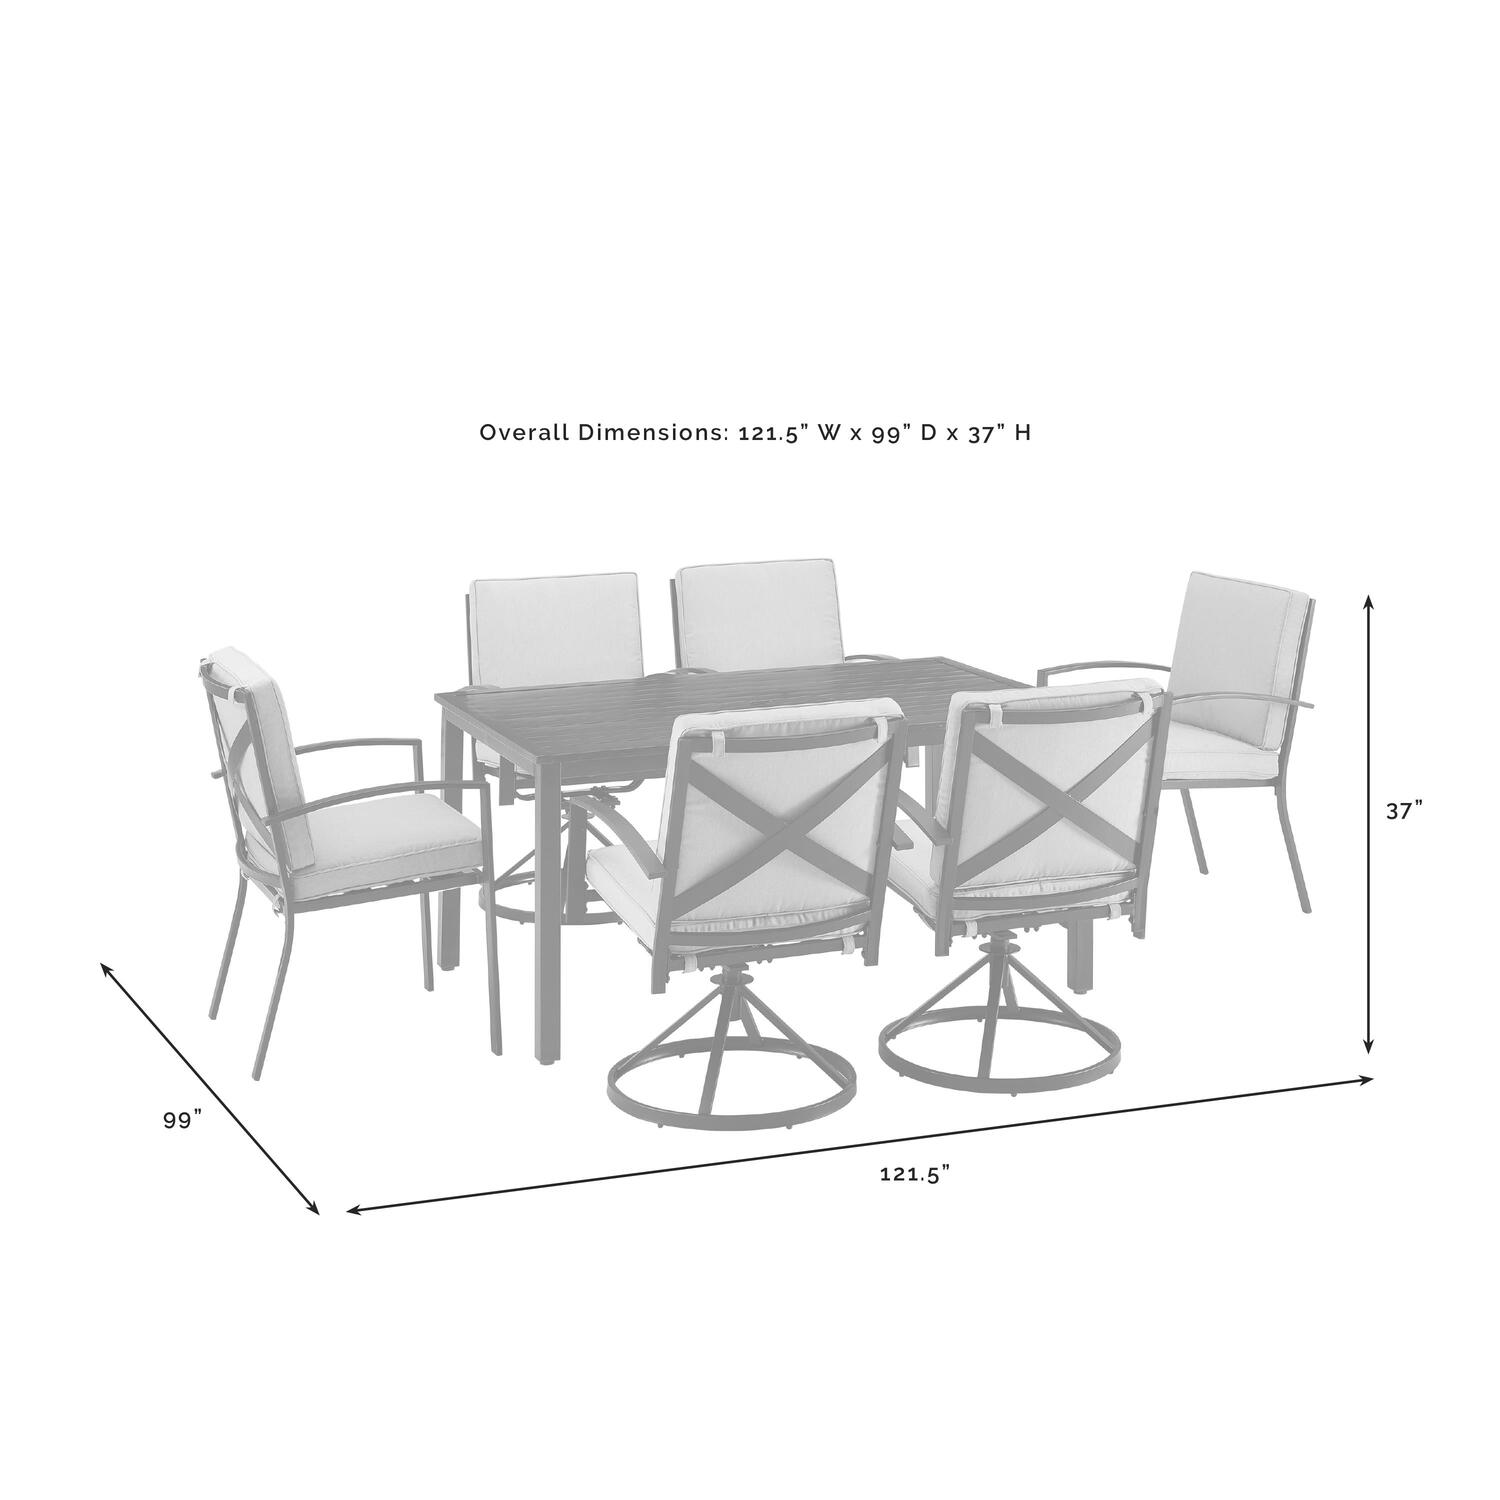 Crosley Furniture Kaplan 7Pc Outdoor Dining Set in Oil Rubbed Bronze/Oatmeal - image 4 of 10